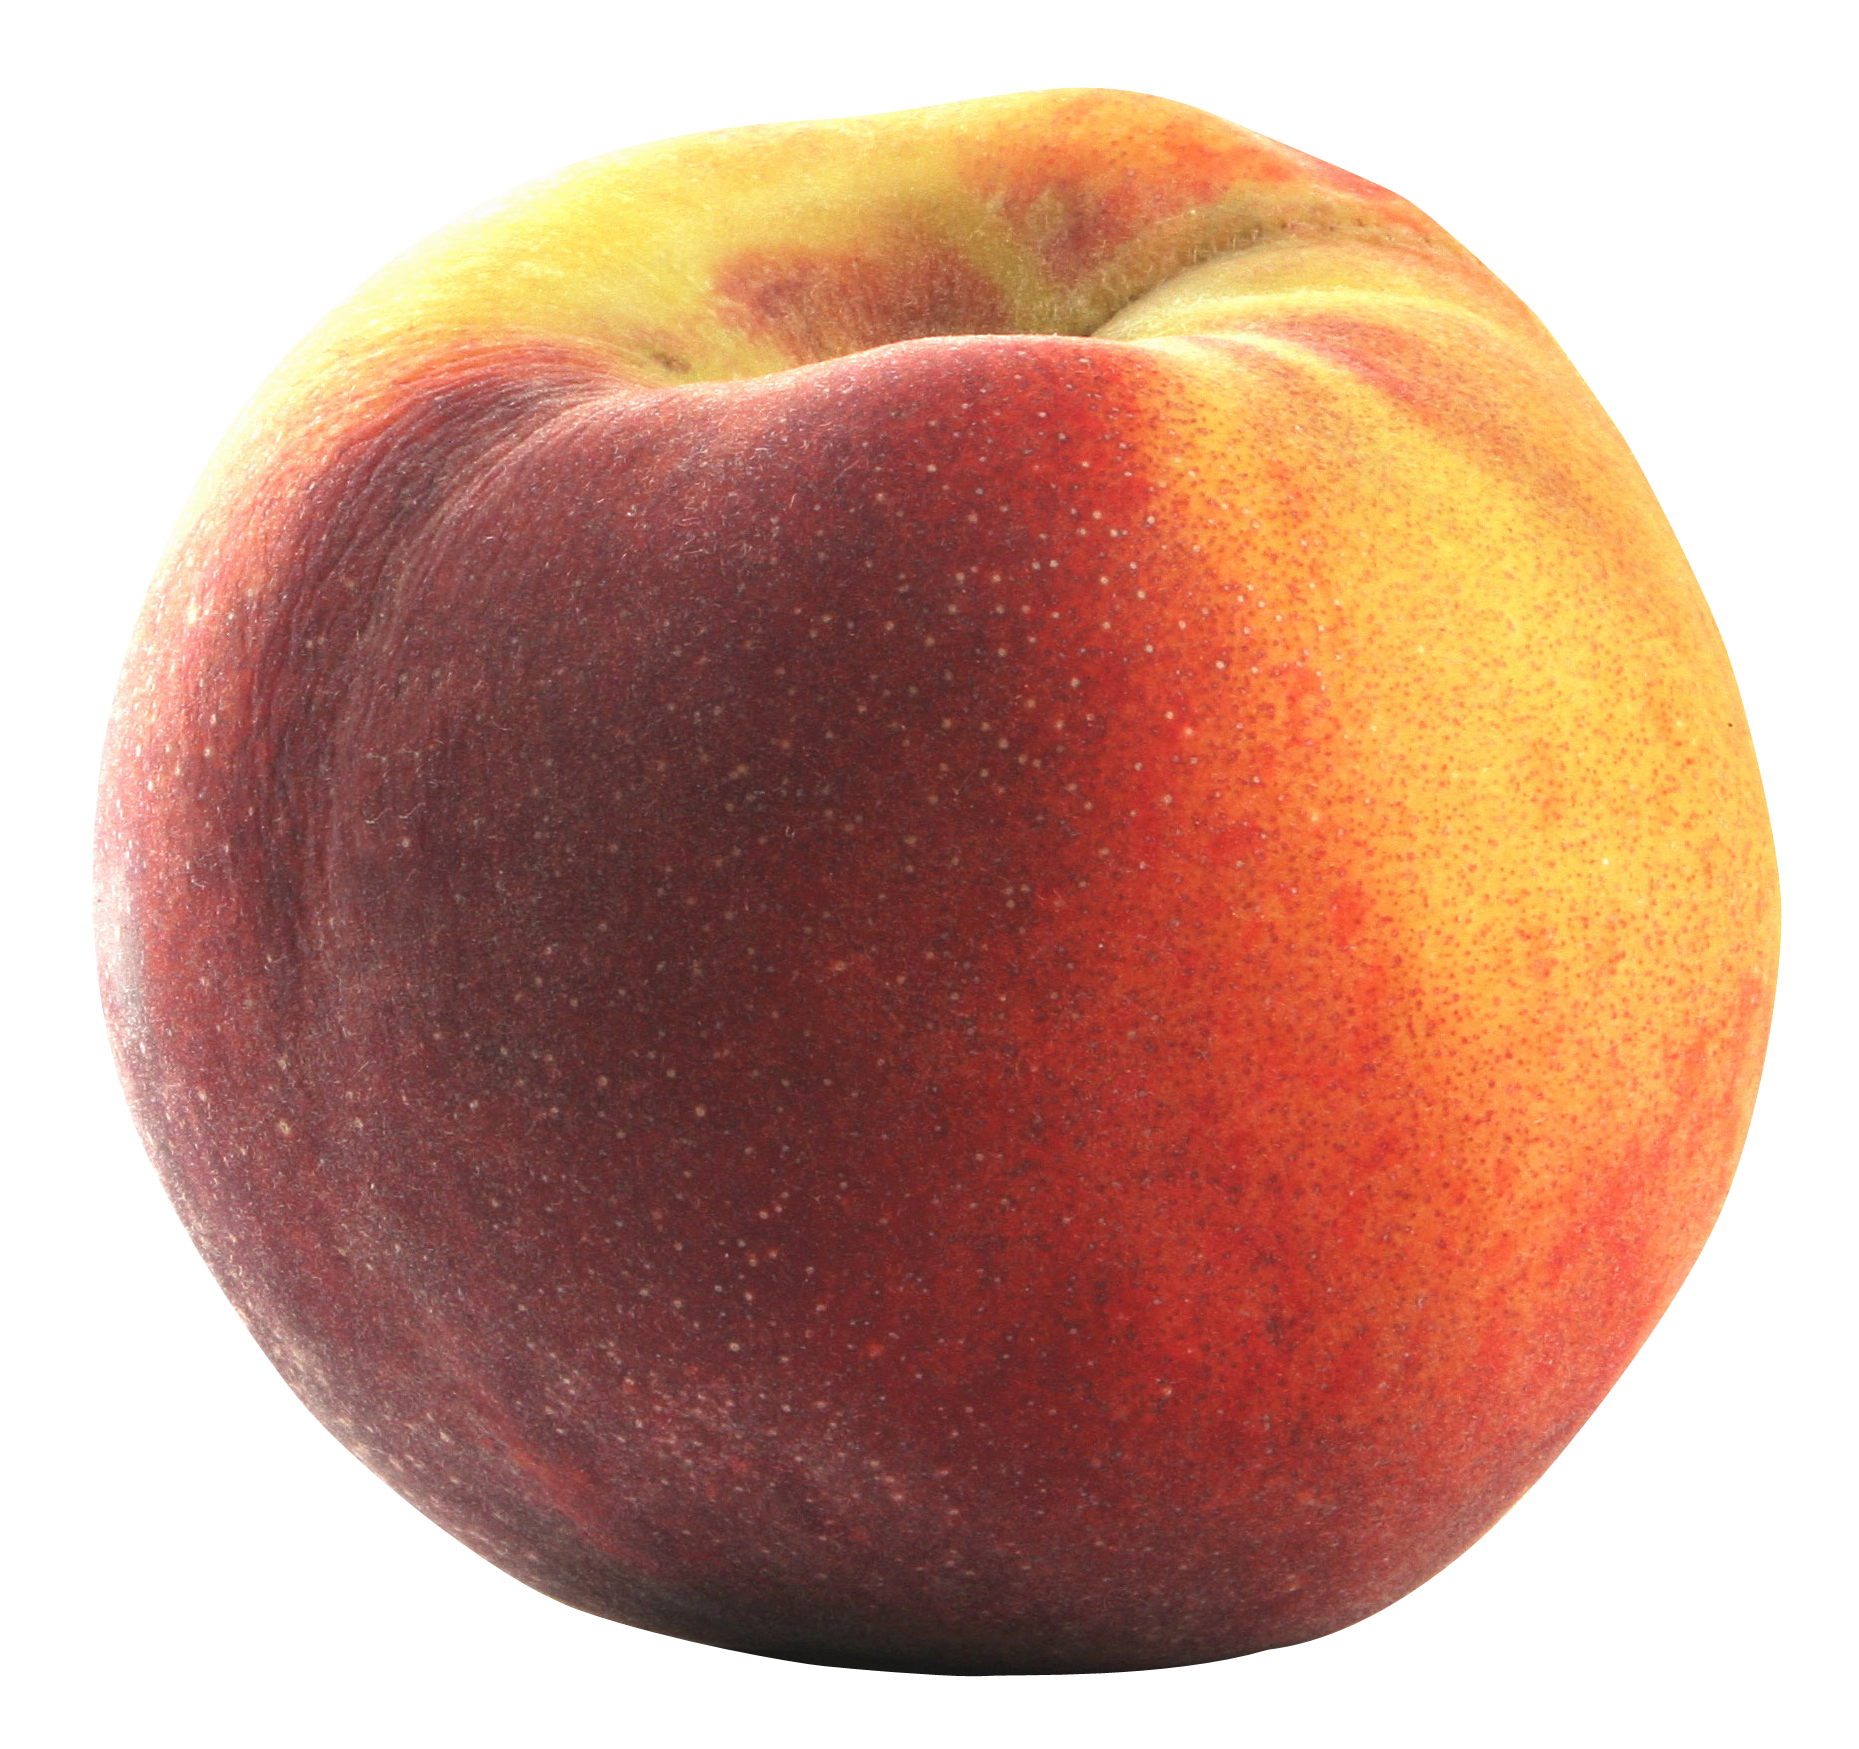 Peach PNG HD Images - Peach Png